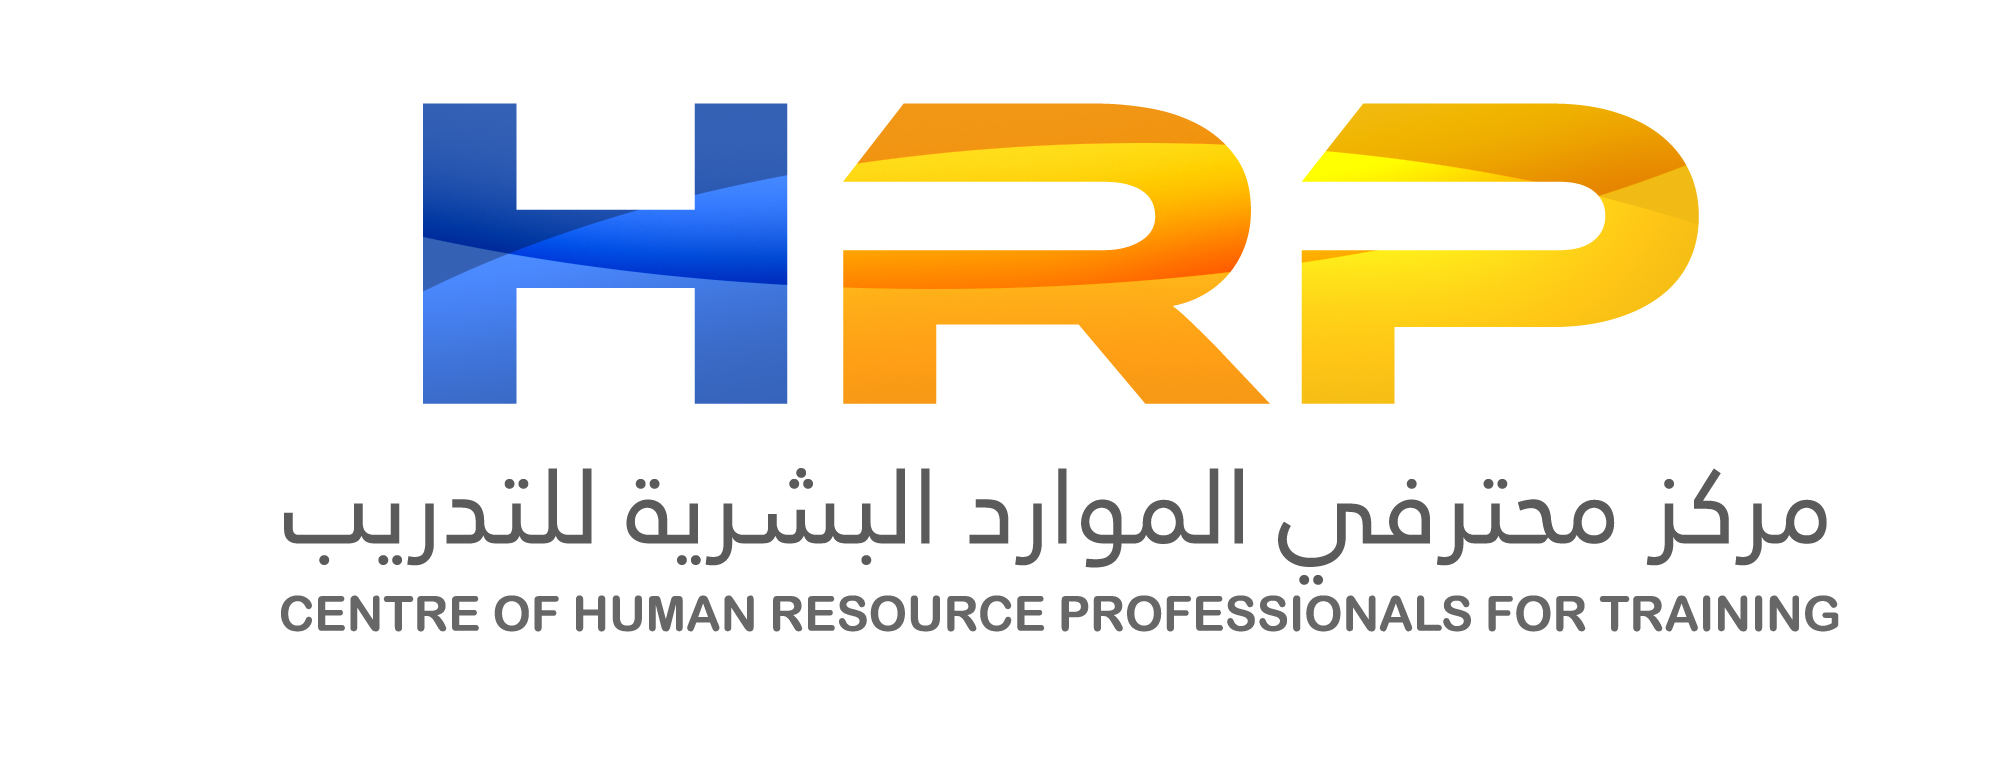 Centre of Human Resource Professionals for Training